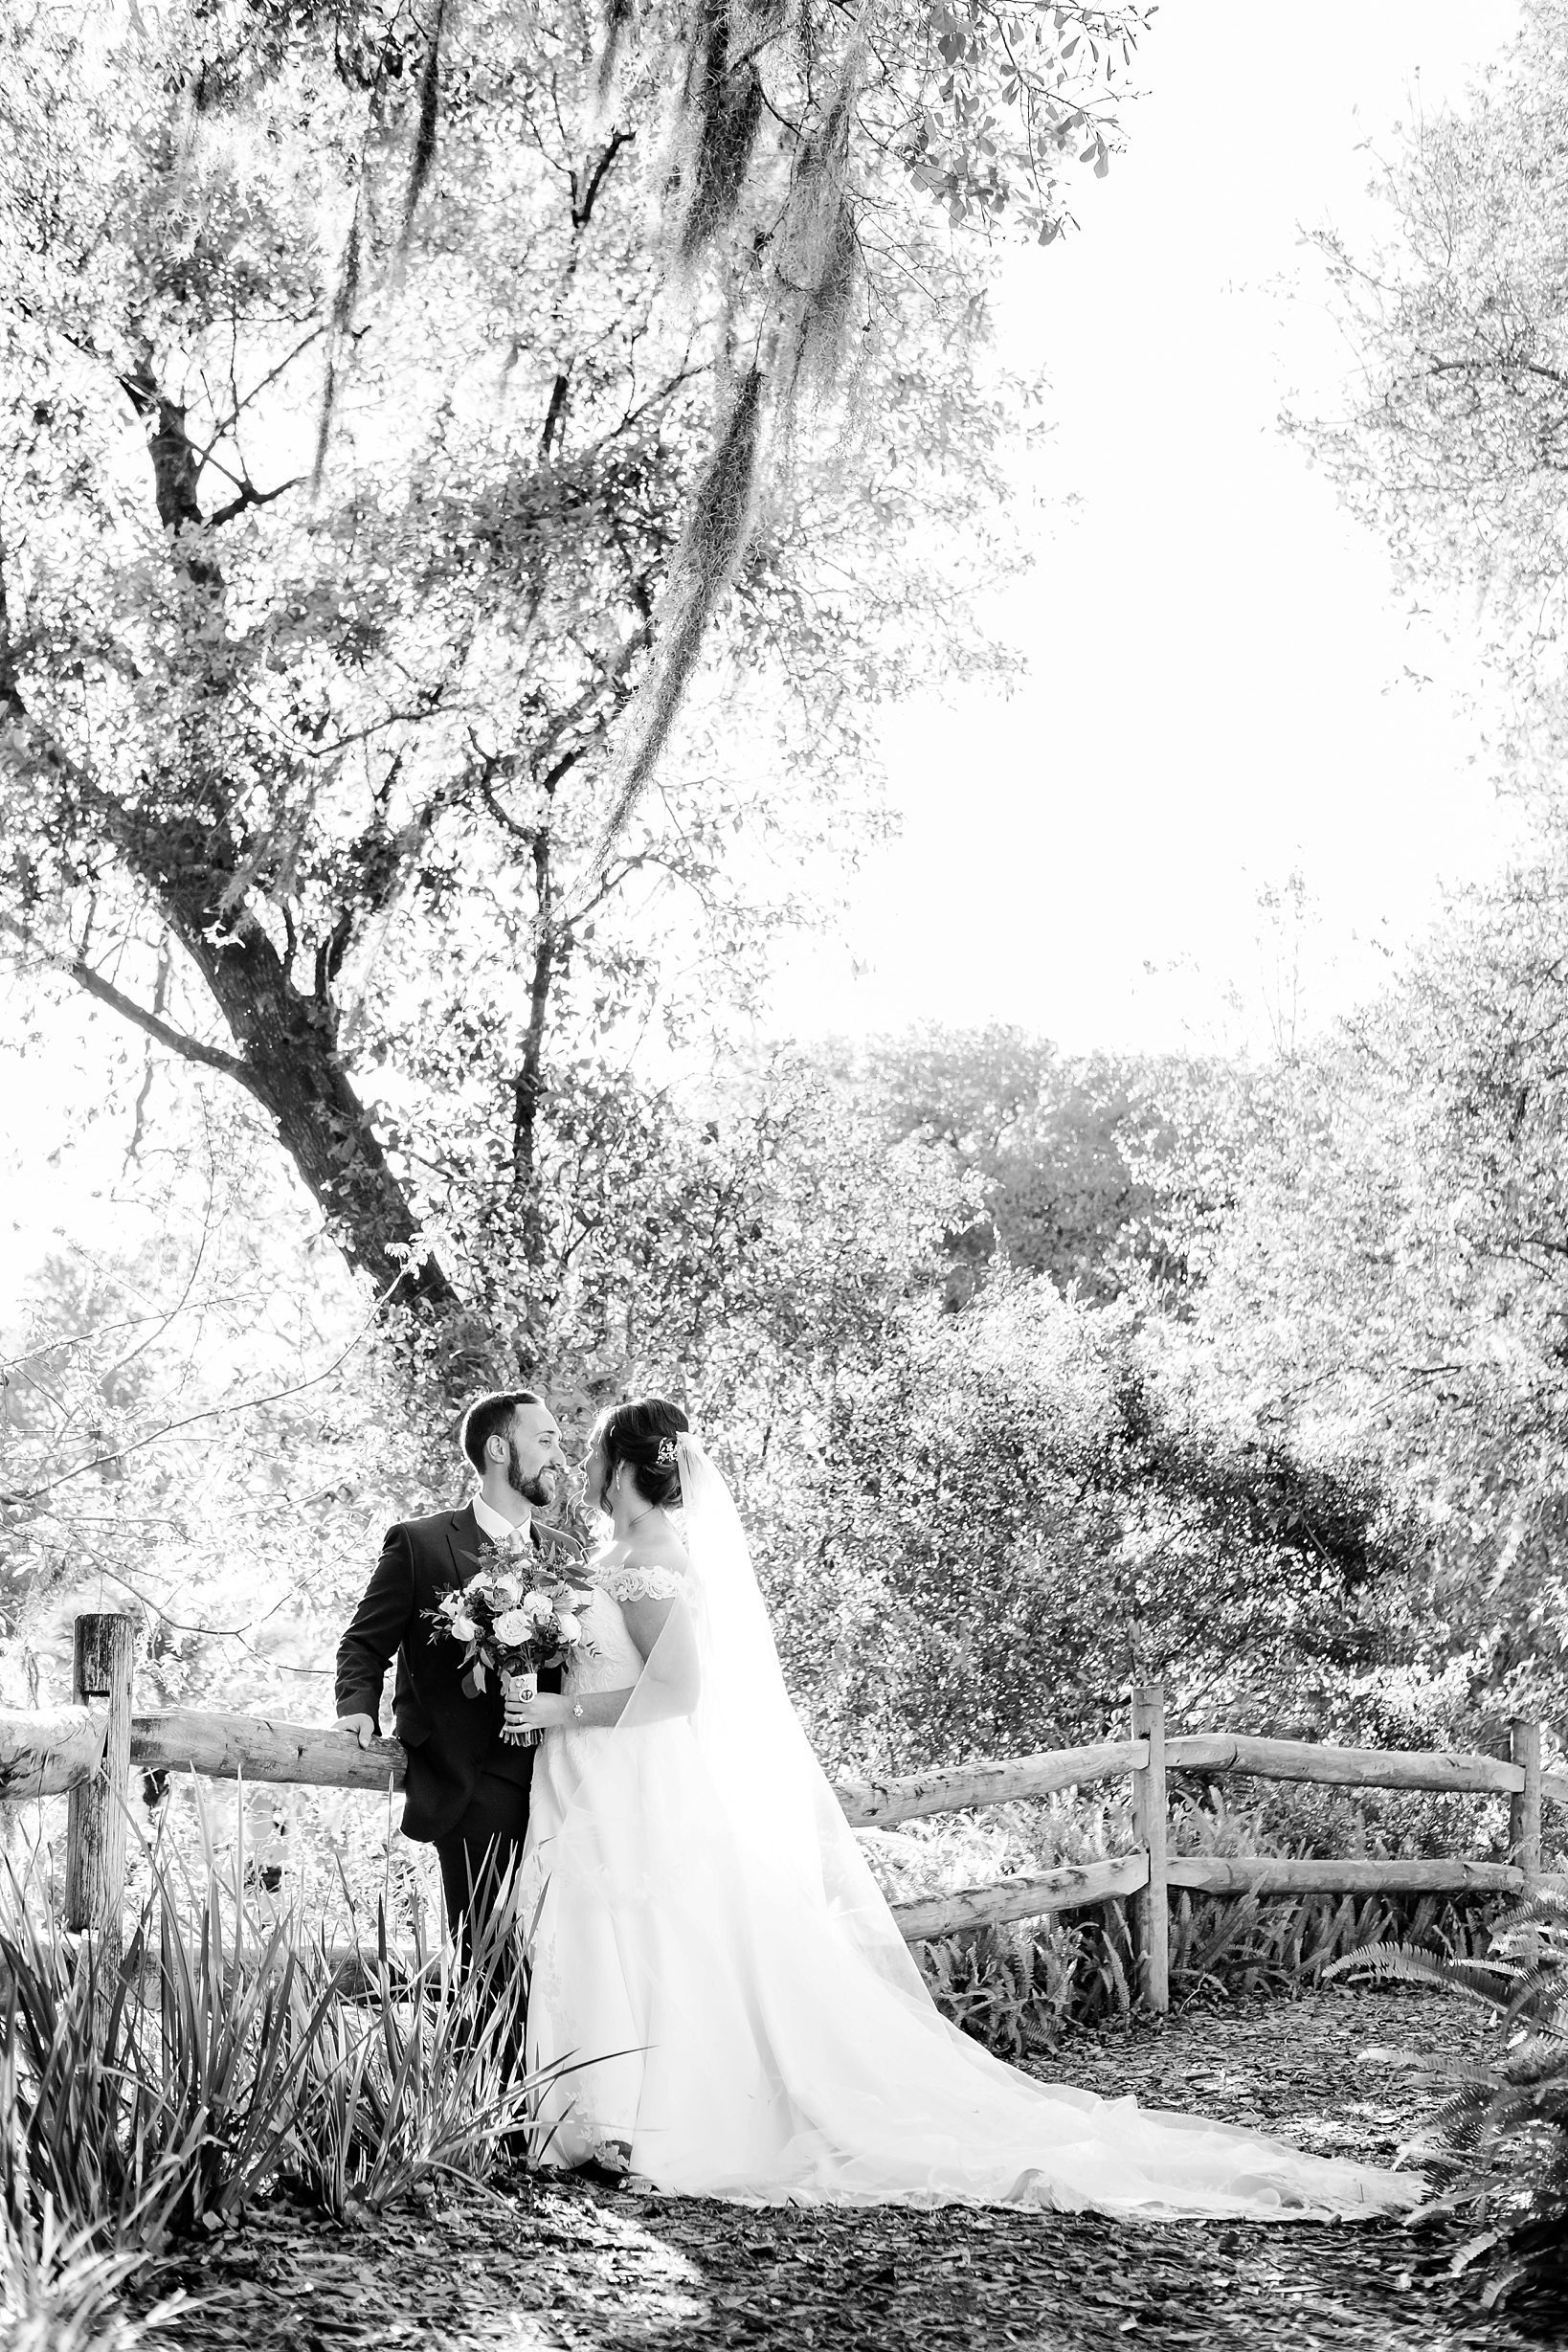 Timeless black and white portrait of the Bride and Groom